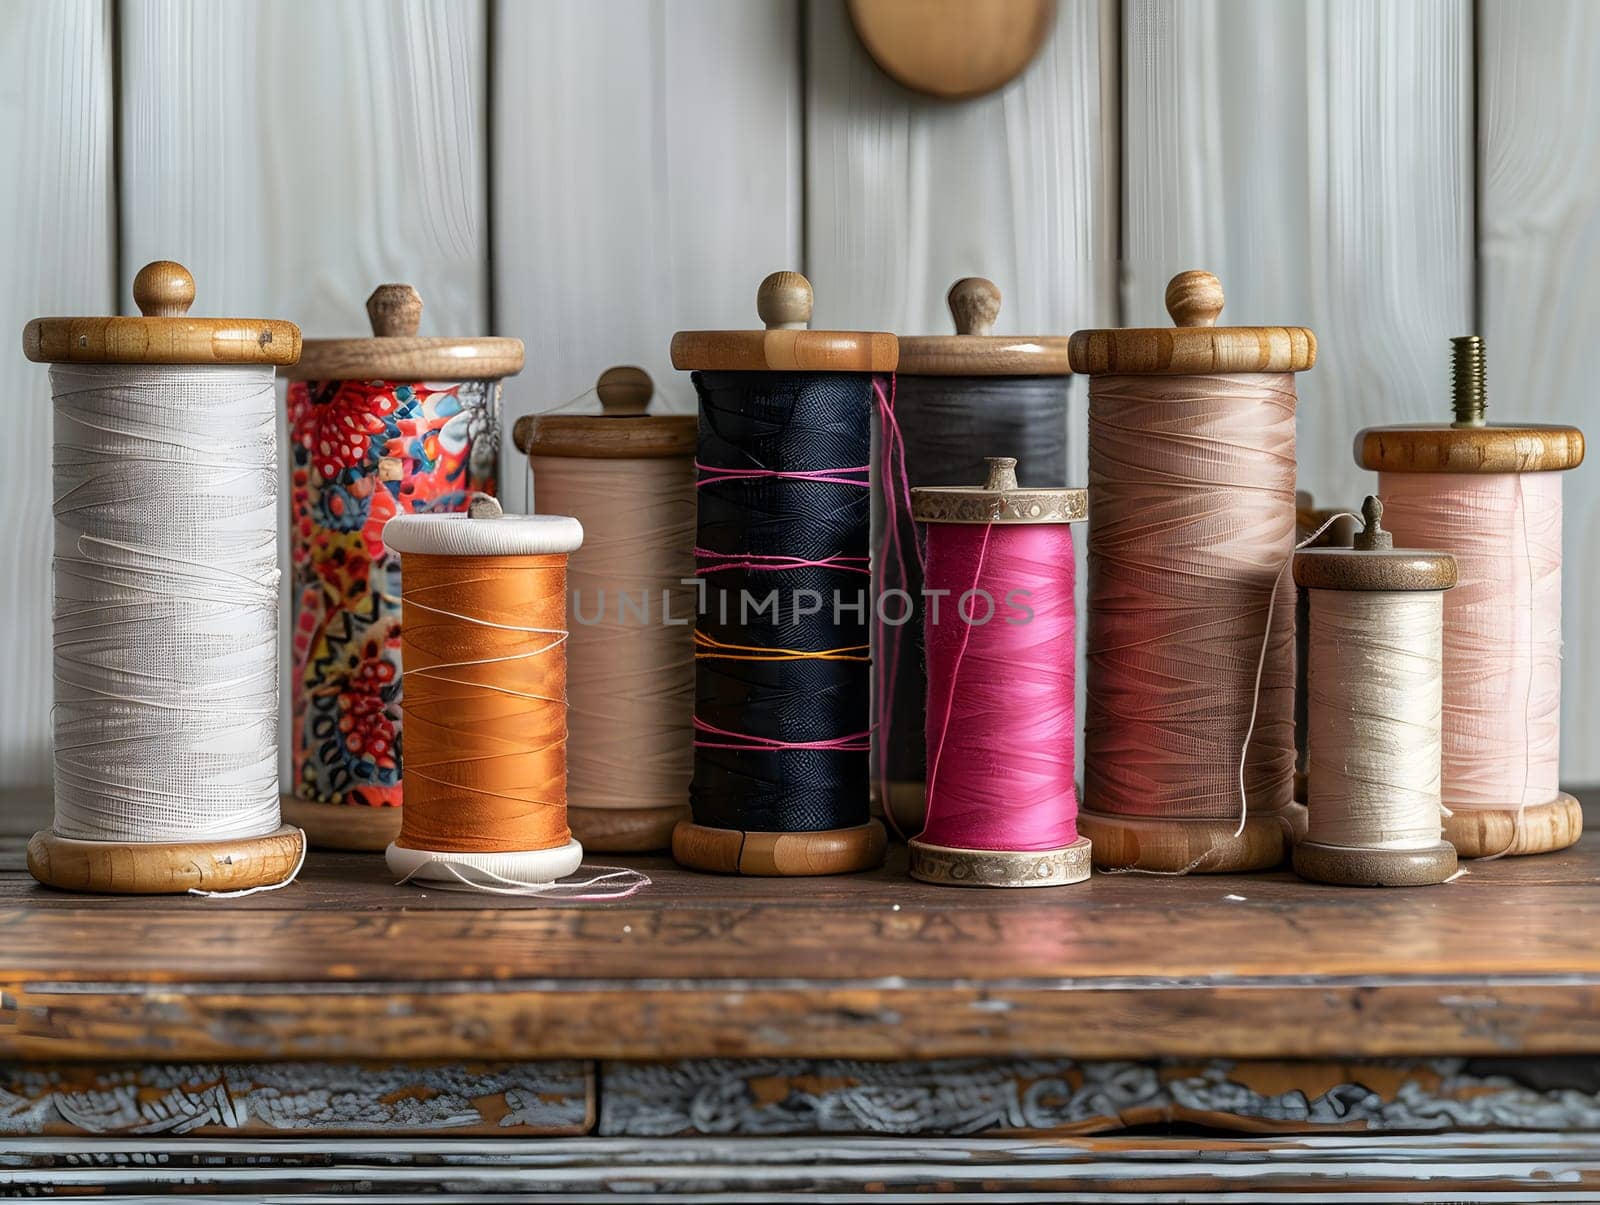 Spools of thread arranged neatly on a wooden table by Nadtochiy